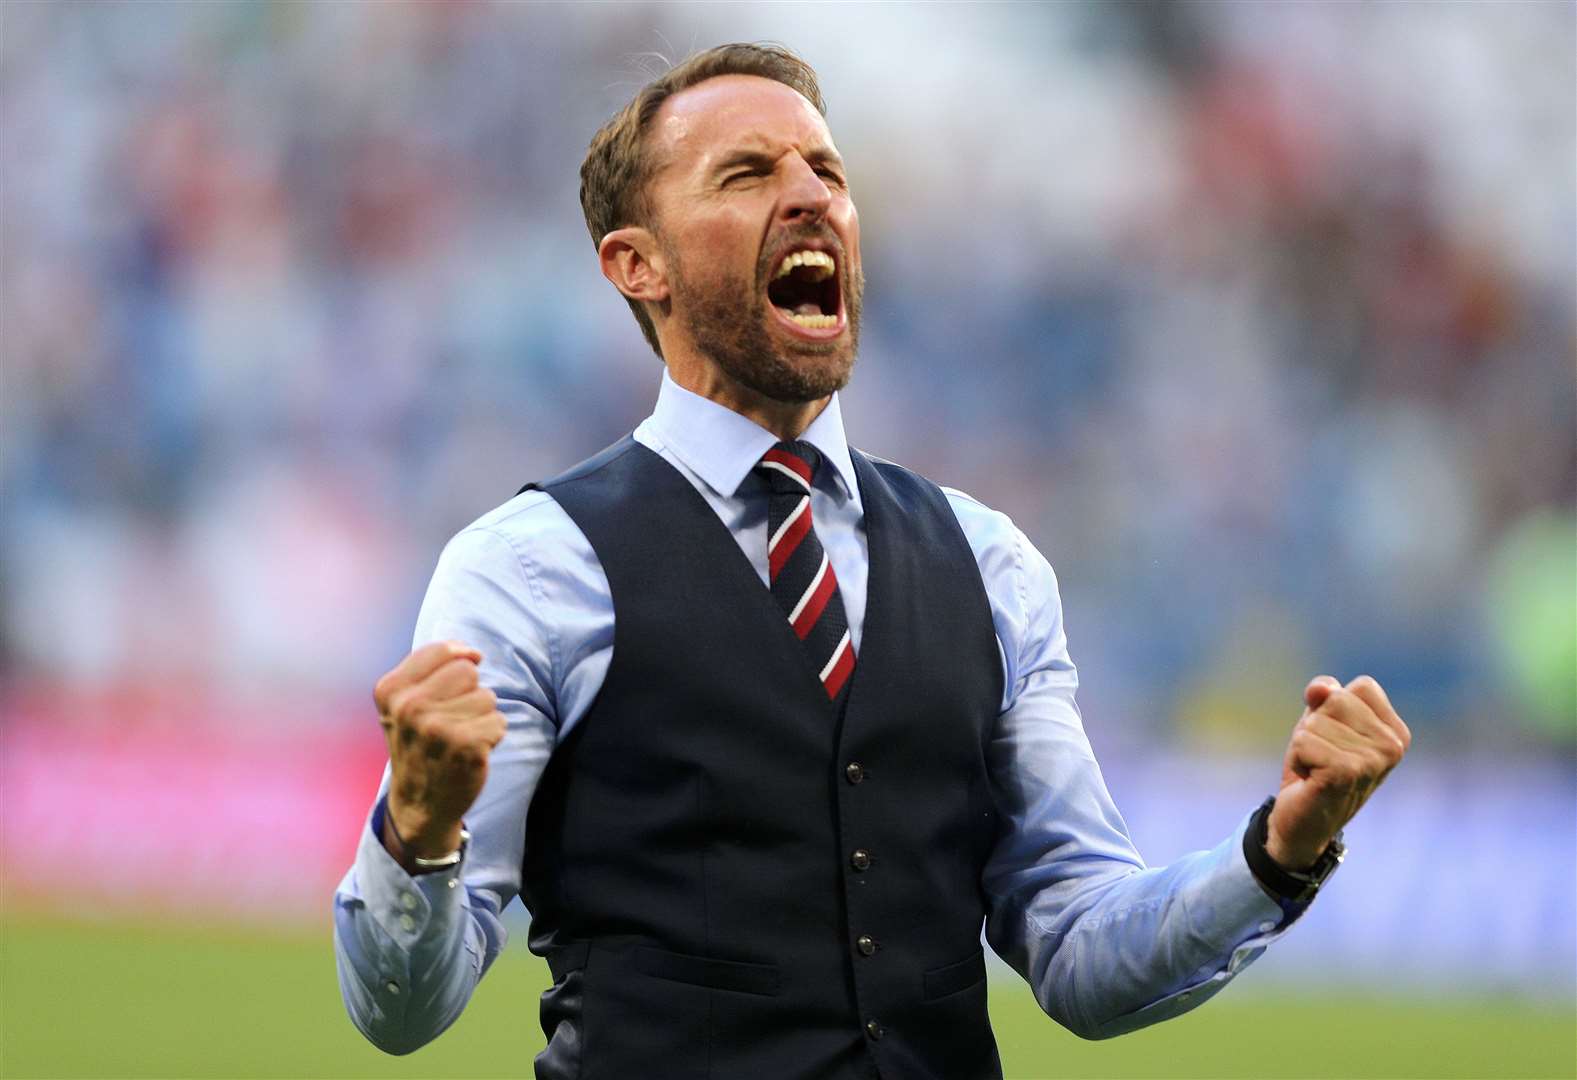 Murdoch had spent the evening with pals watching the Euros' match. Stock Picture: Gareth Southgate celebrating